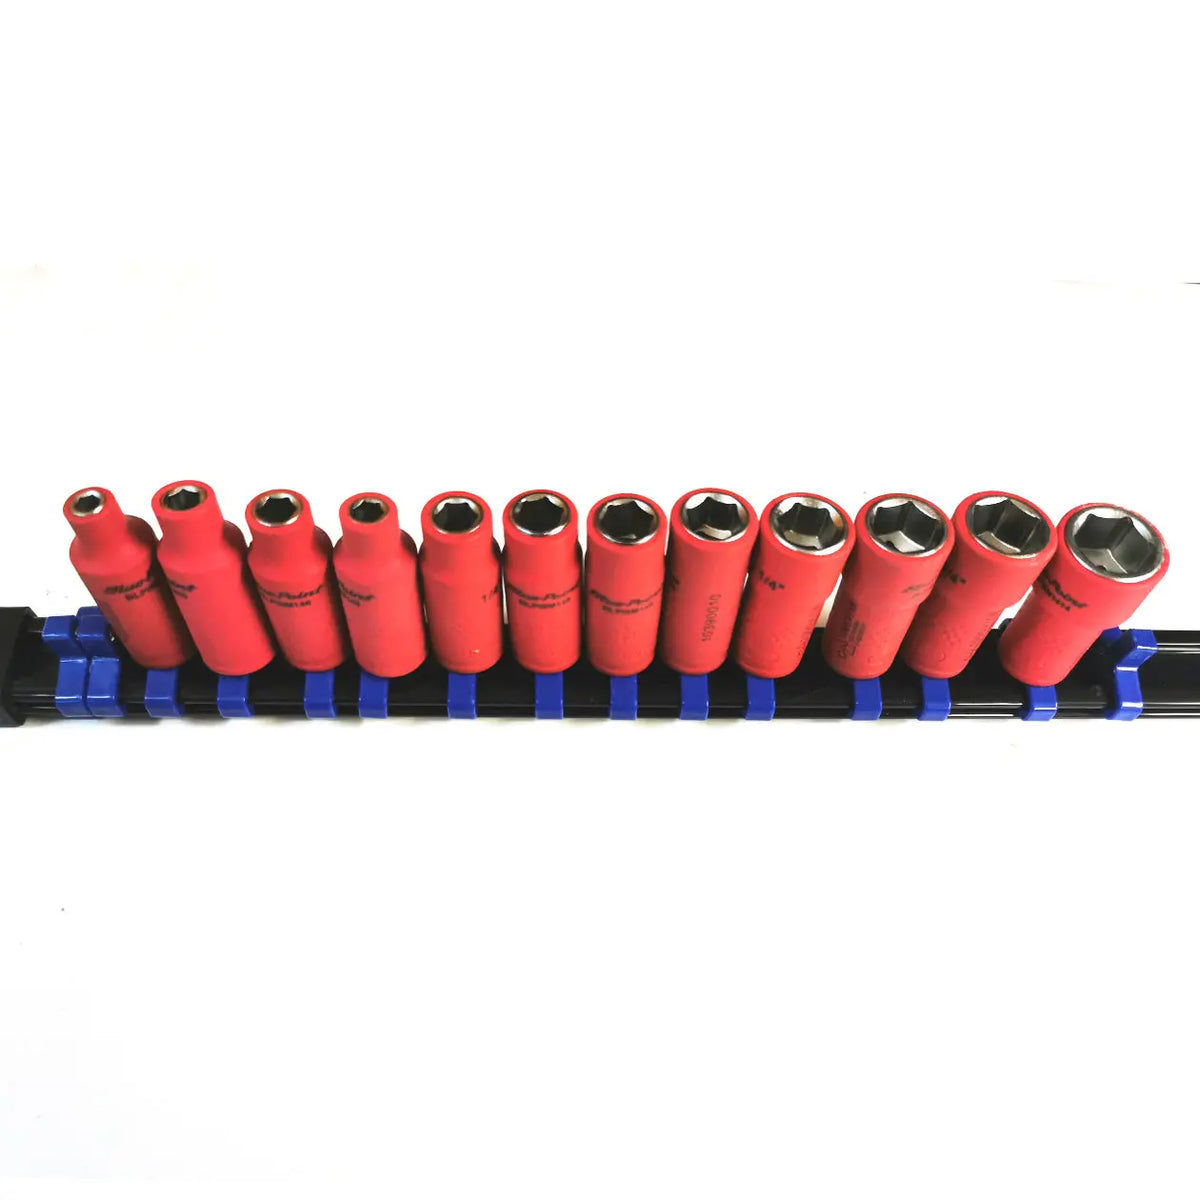 Blue Point 1/4  Insulated Metric Sockets 4mm-14mm 12 Sockets - FairTools Blue Point 1/4  Insulated Metric Sockets 4mm-14mm 12 Sockets